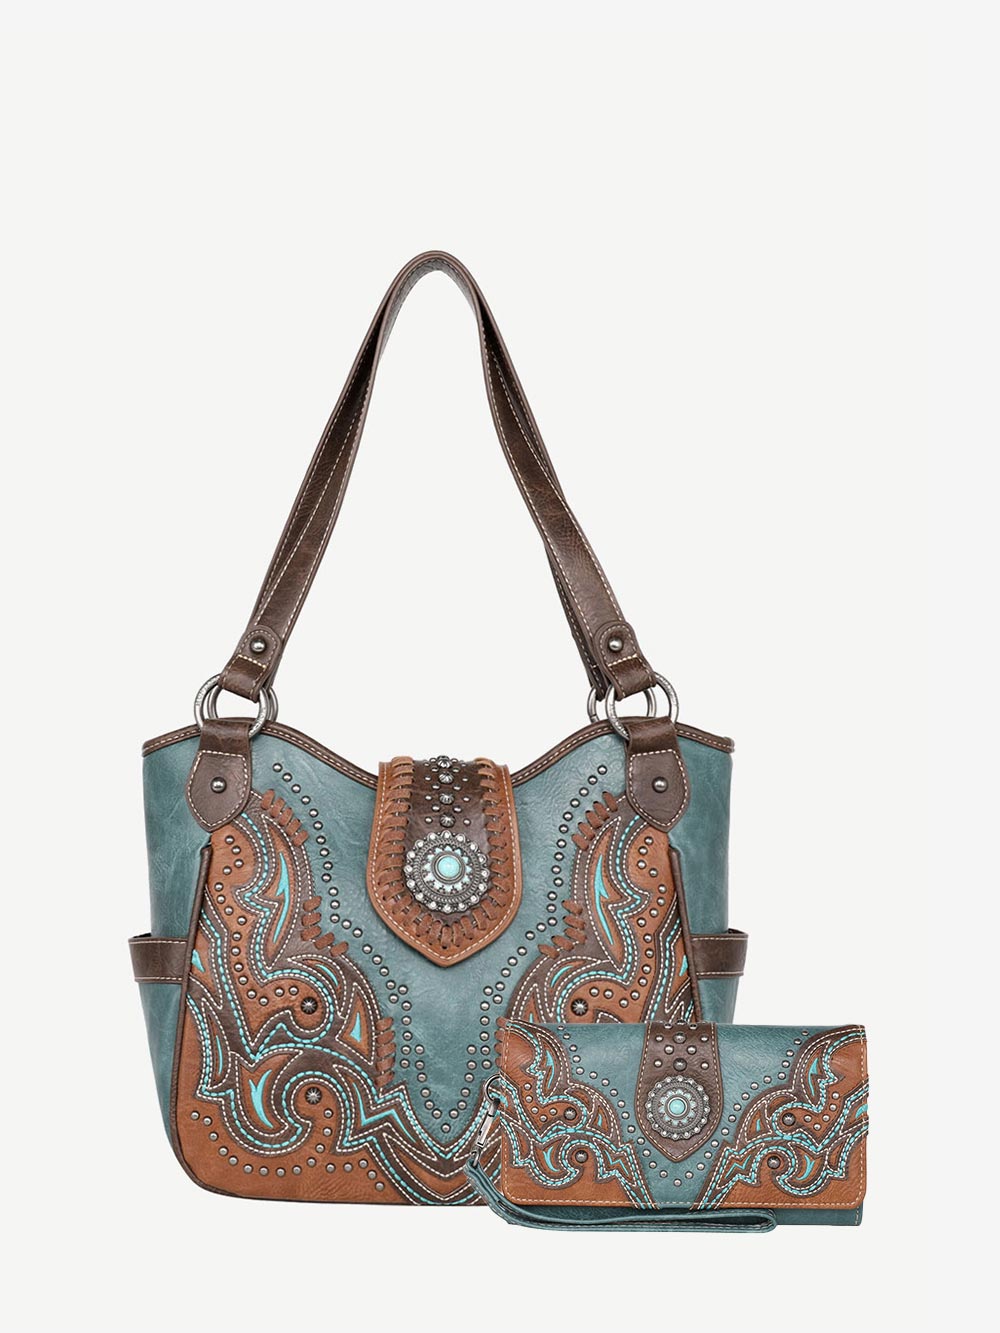 Montana West Laser Cut-out Buckle Concealed Carry Tote Set - Montana West World